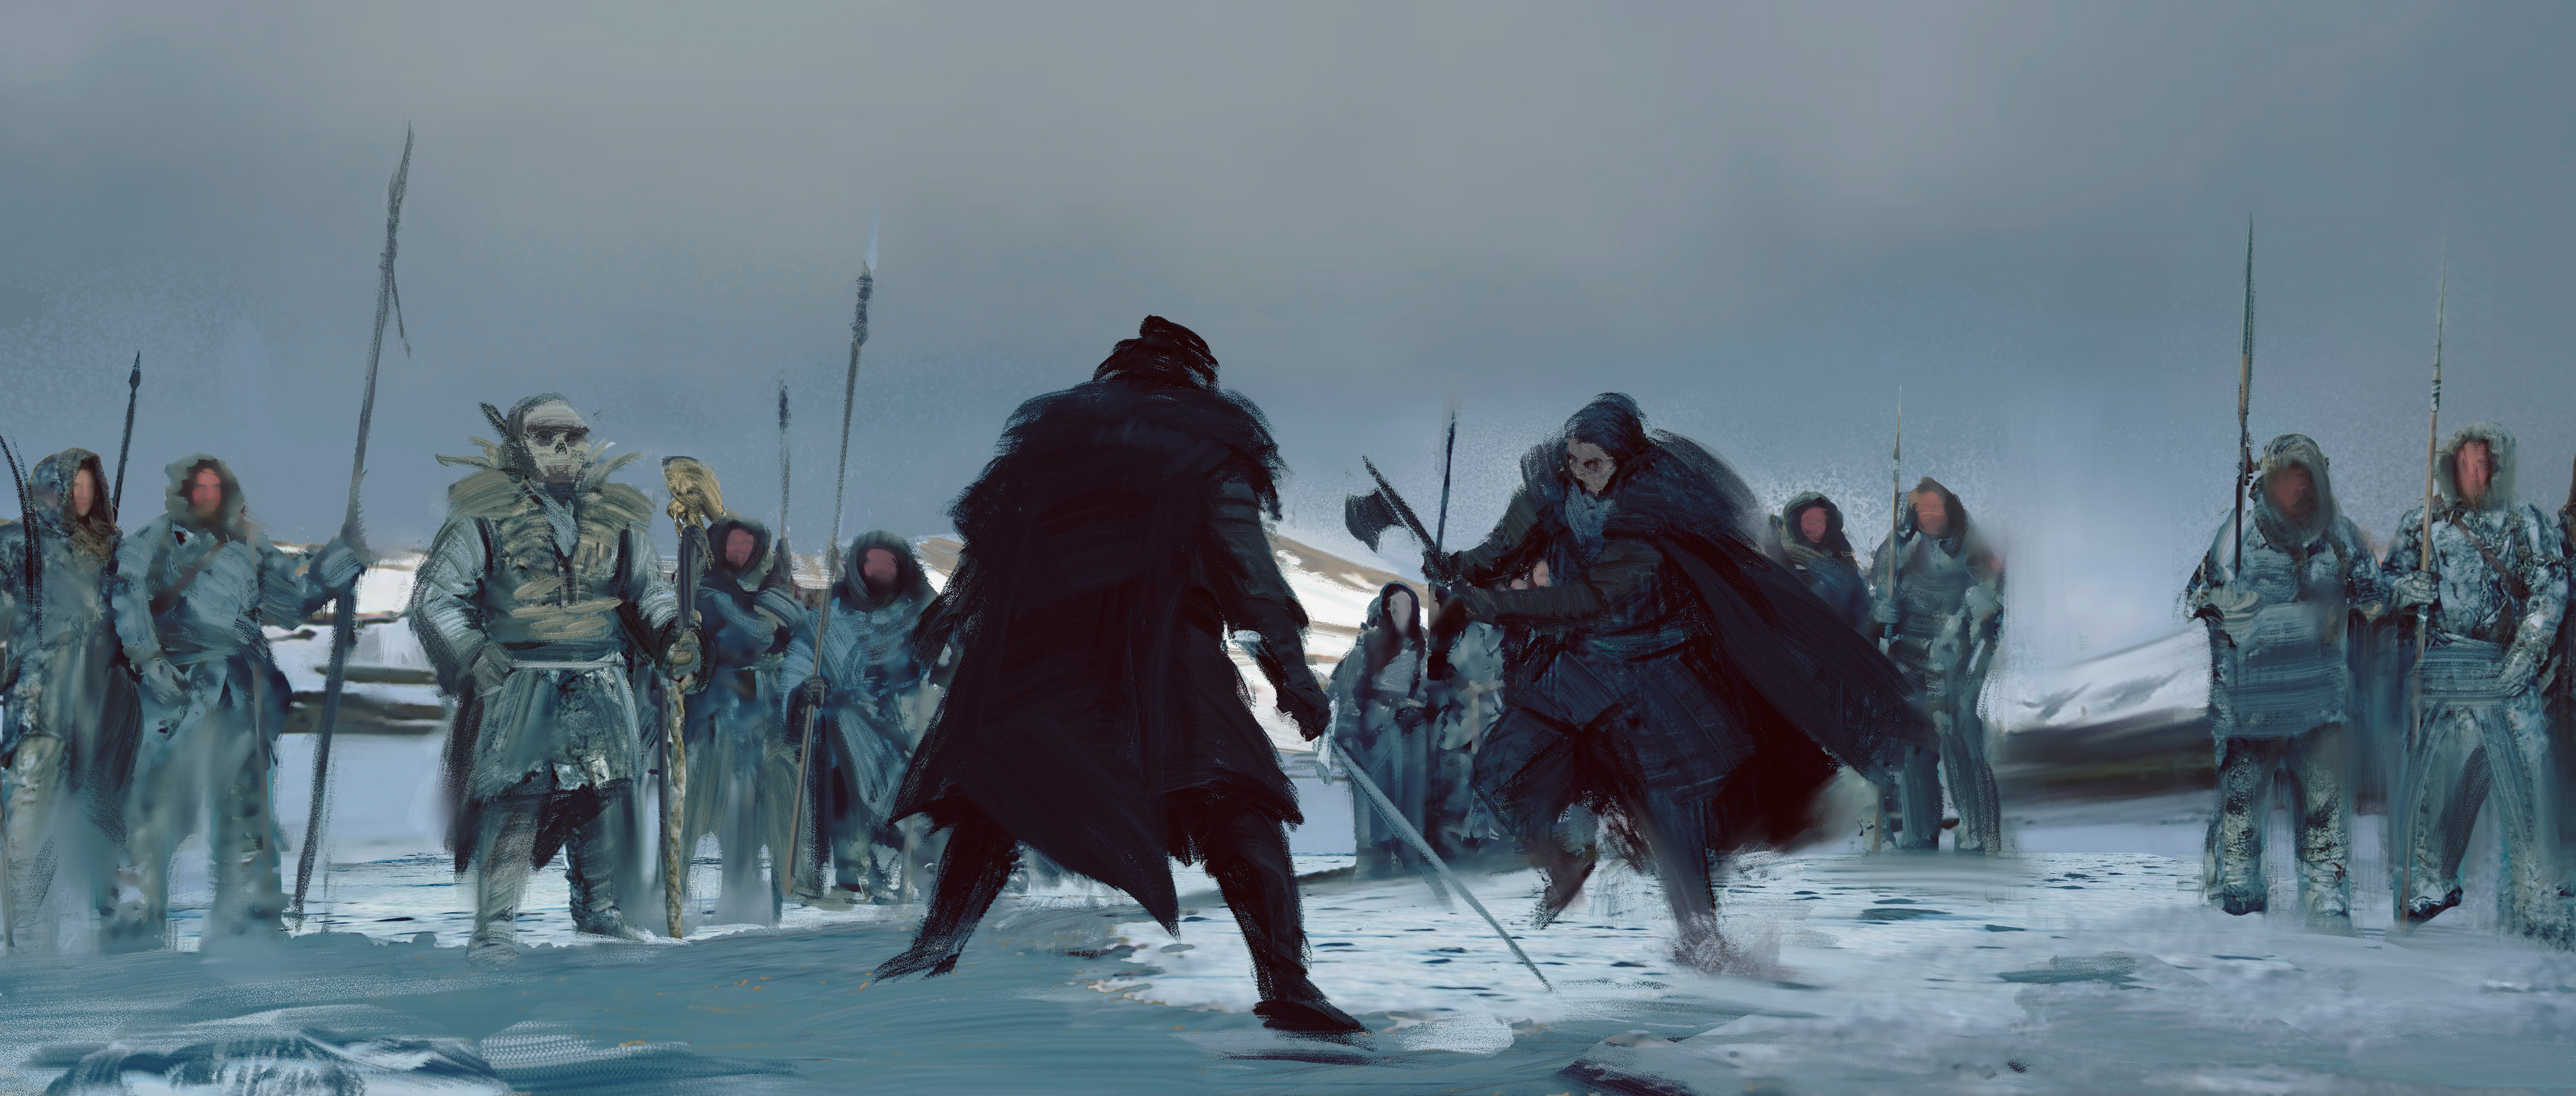 Jon and Qhorin fight